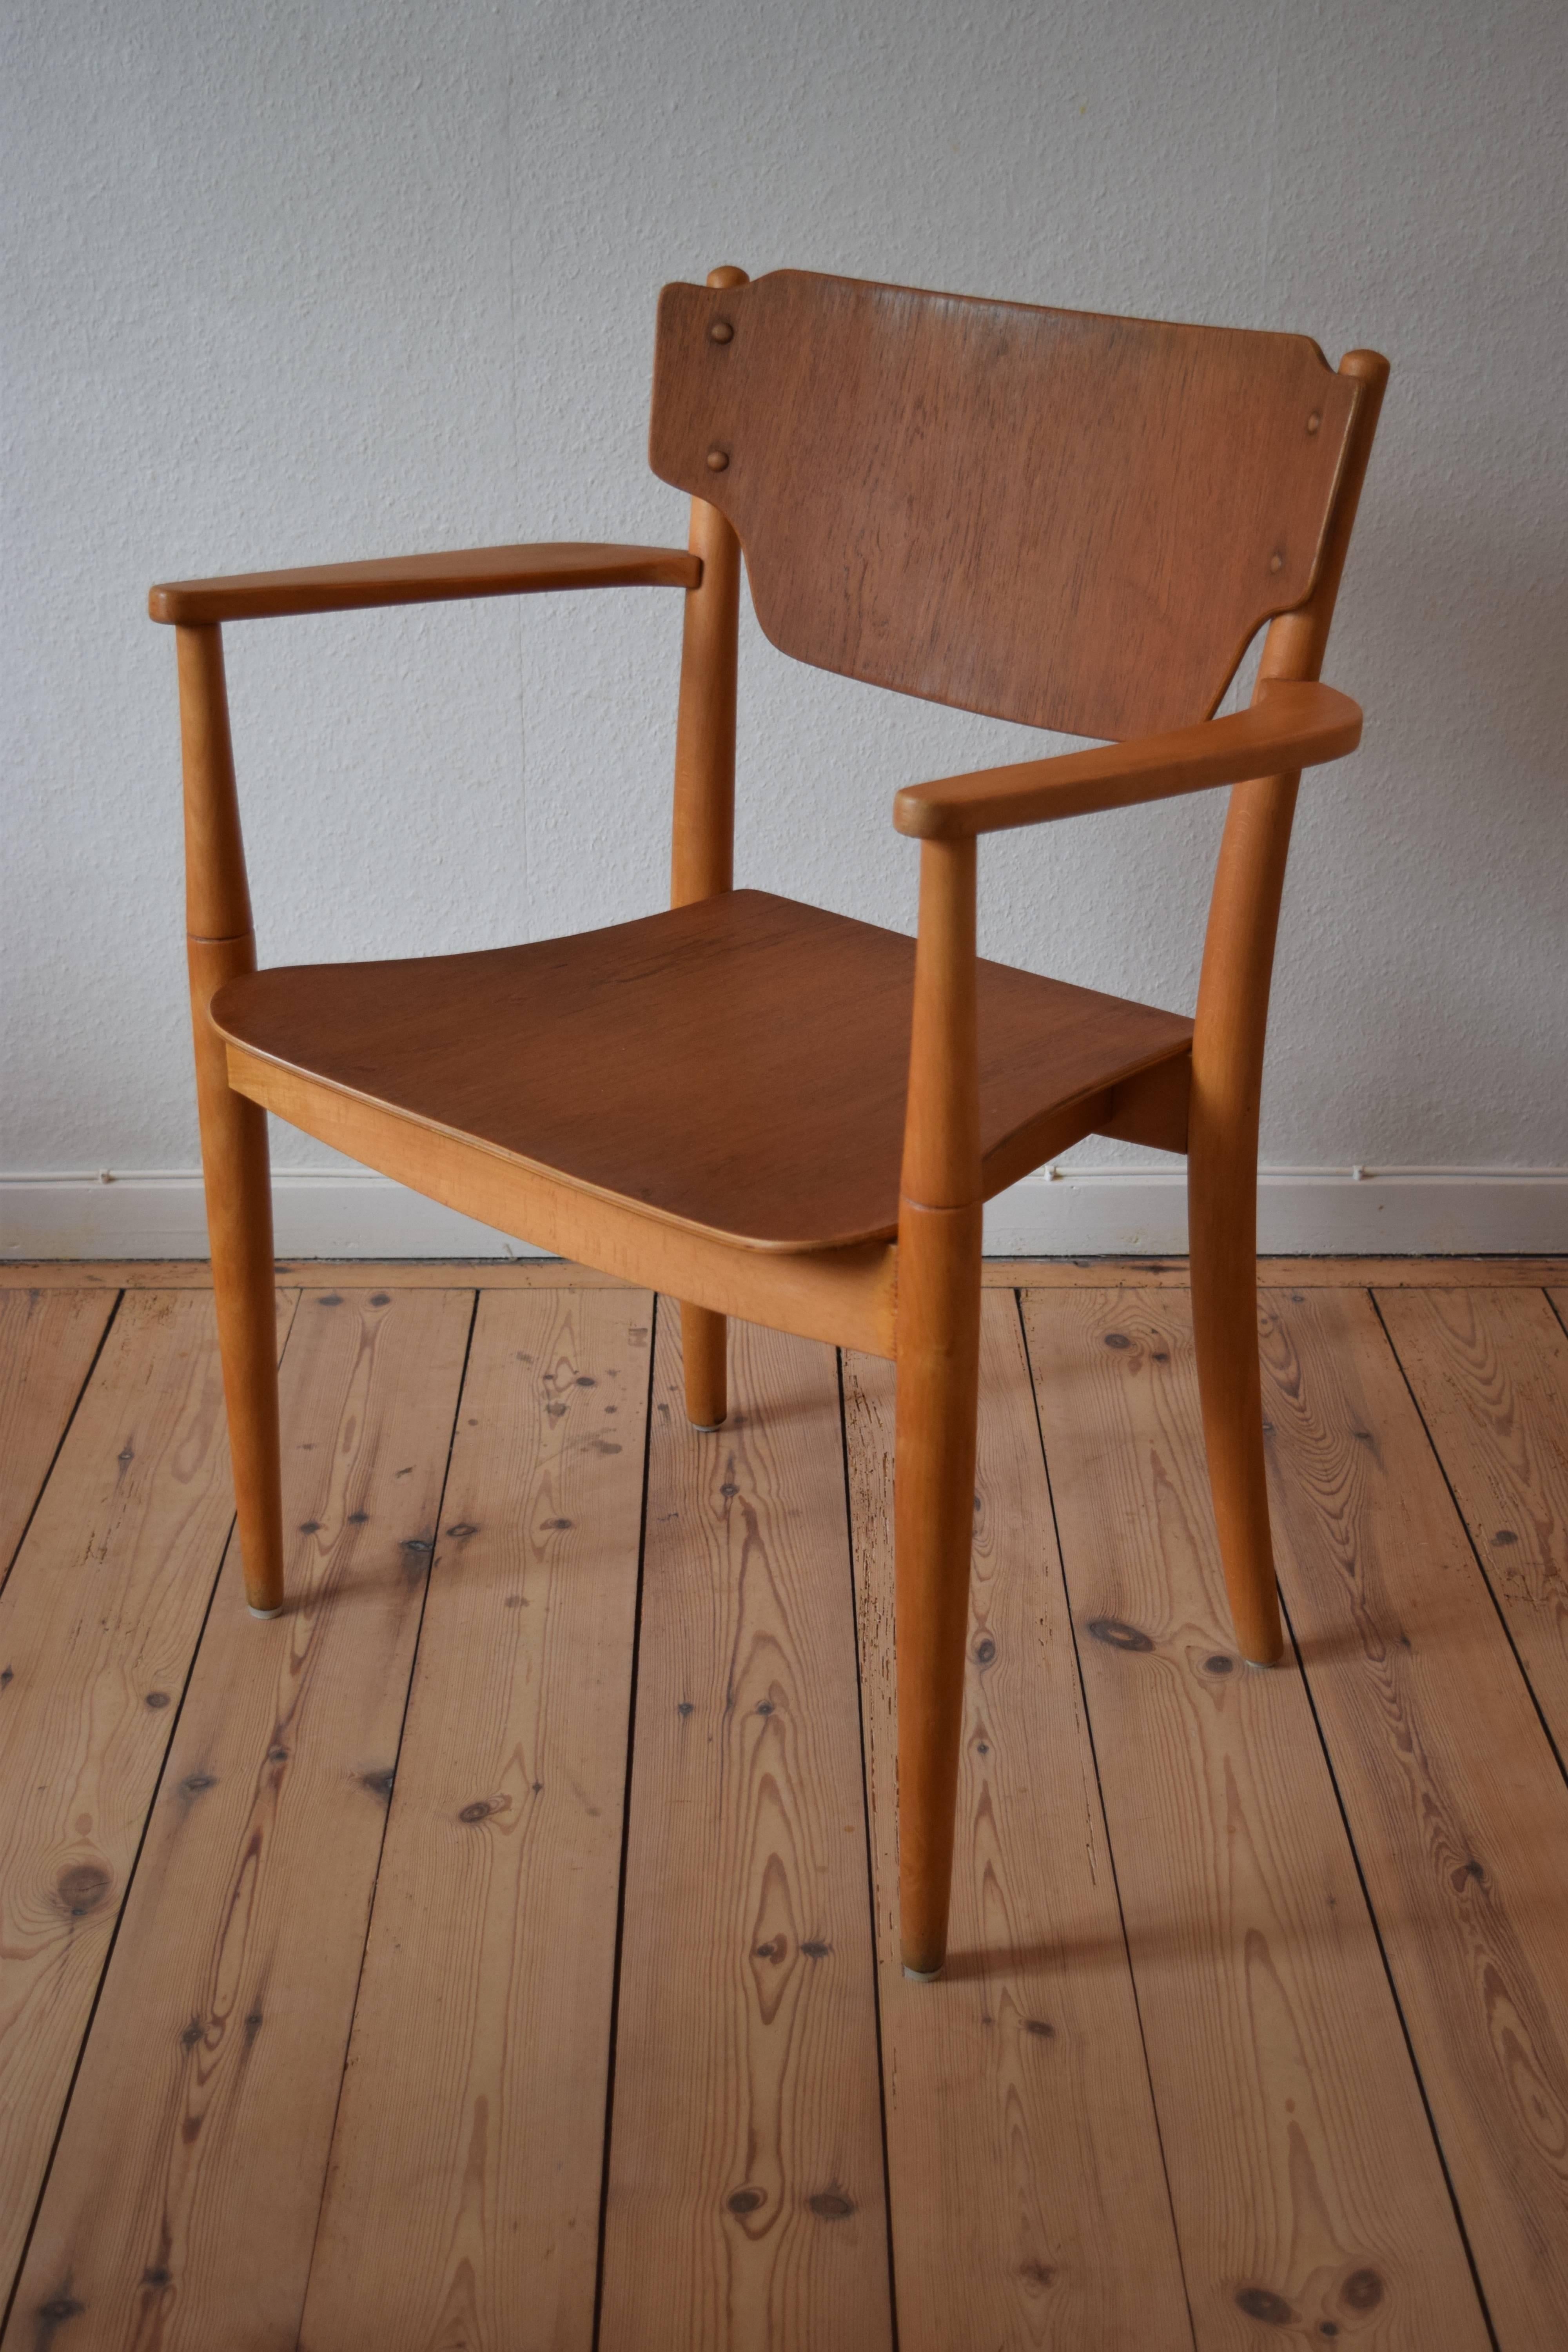 This 'Portex' chair was designed by Peter Hvidt & Orla Mølgaard-Nielsen in 1944, and was manufactured in Denmark. It was originally designed as stacking armchair, and was one of the first stacking chairs designed in Denmark. it remains in a very